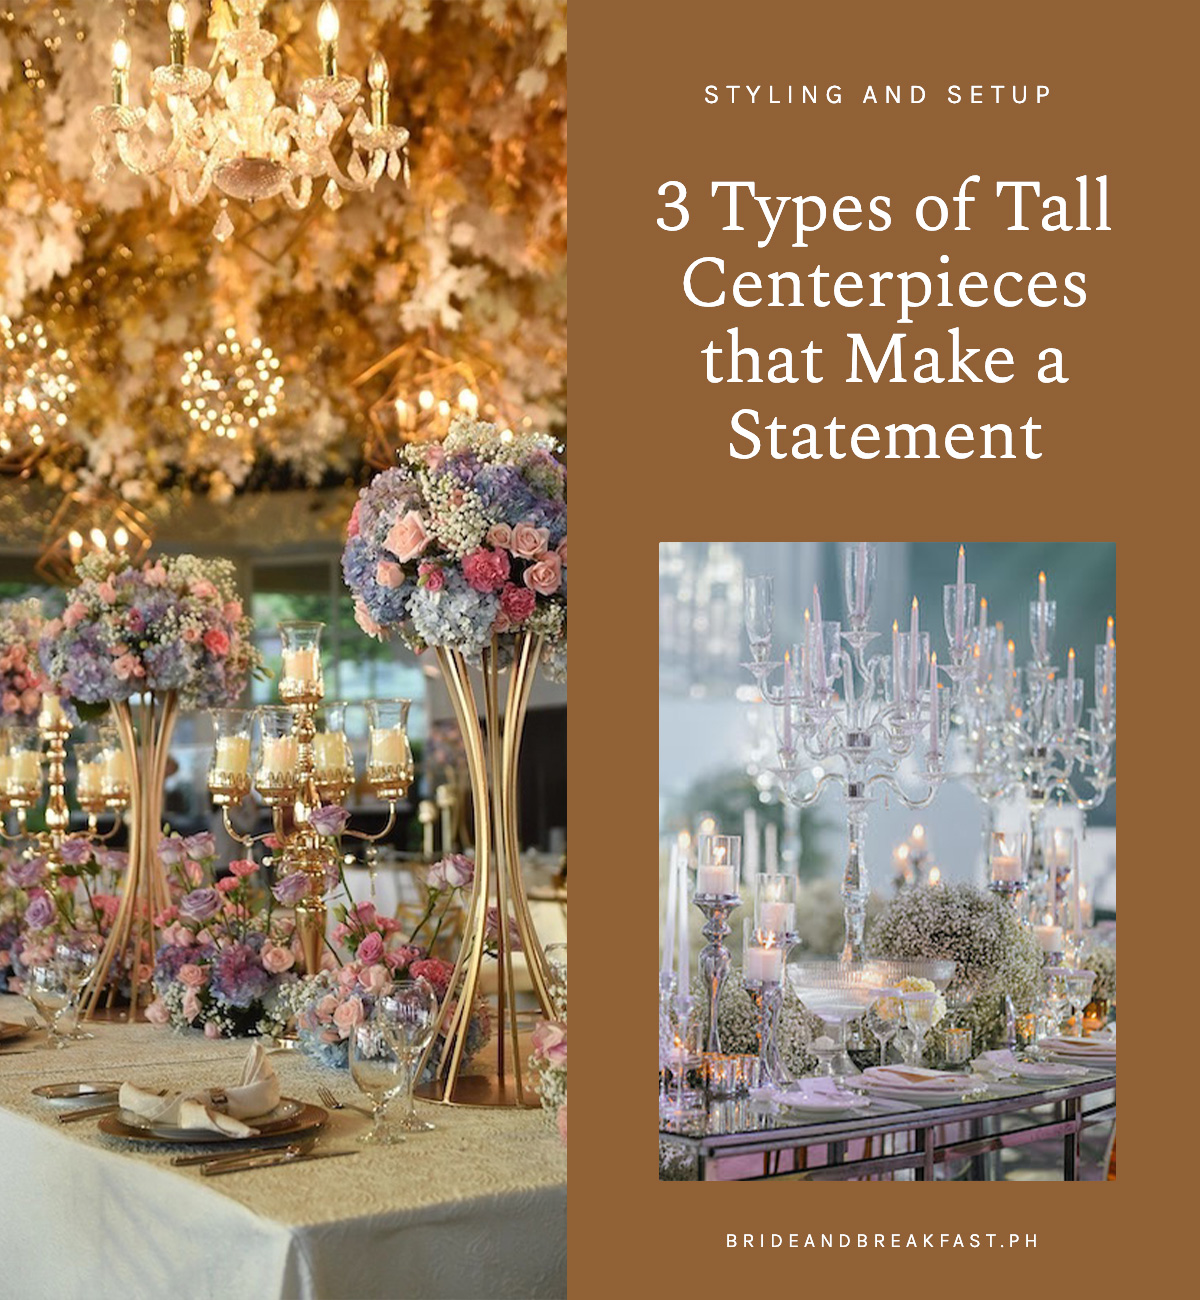 3 Types of Tall Centerpieces that Make a Statement